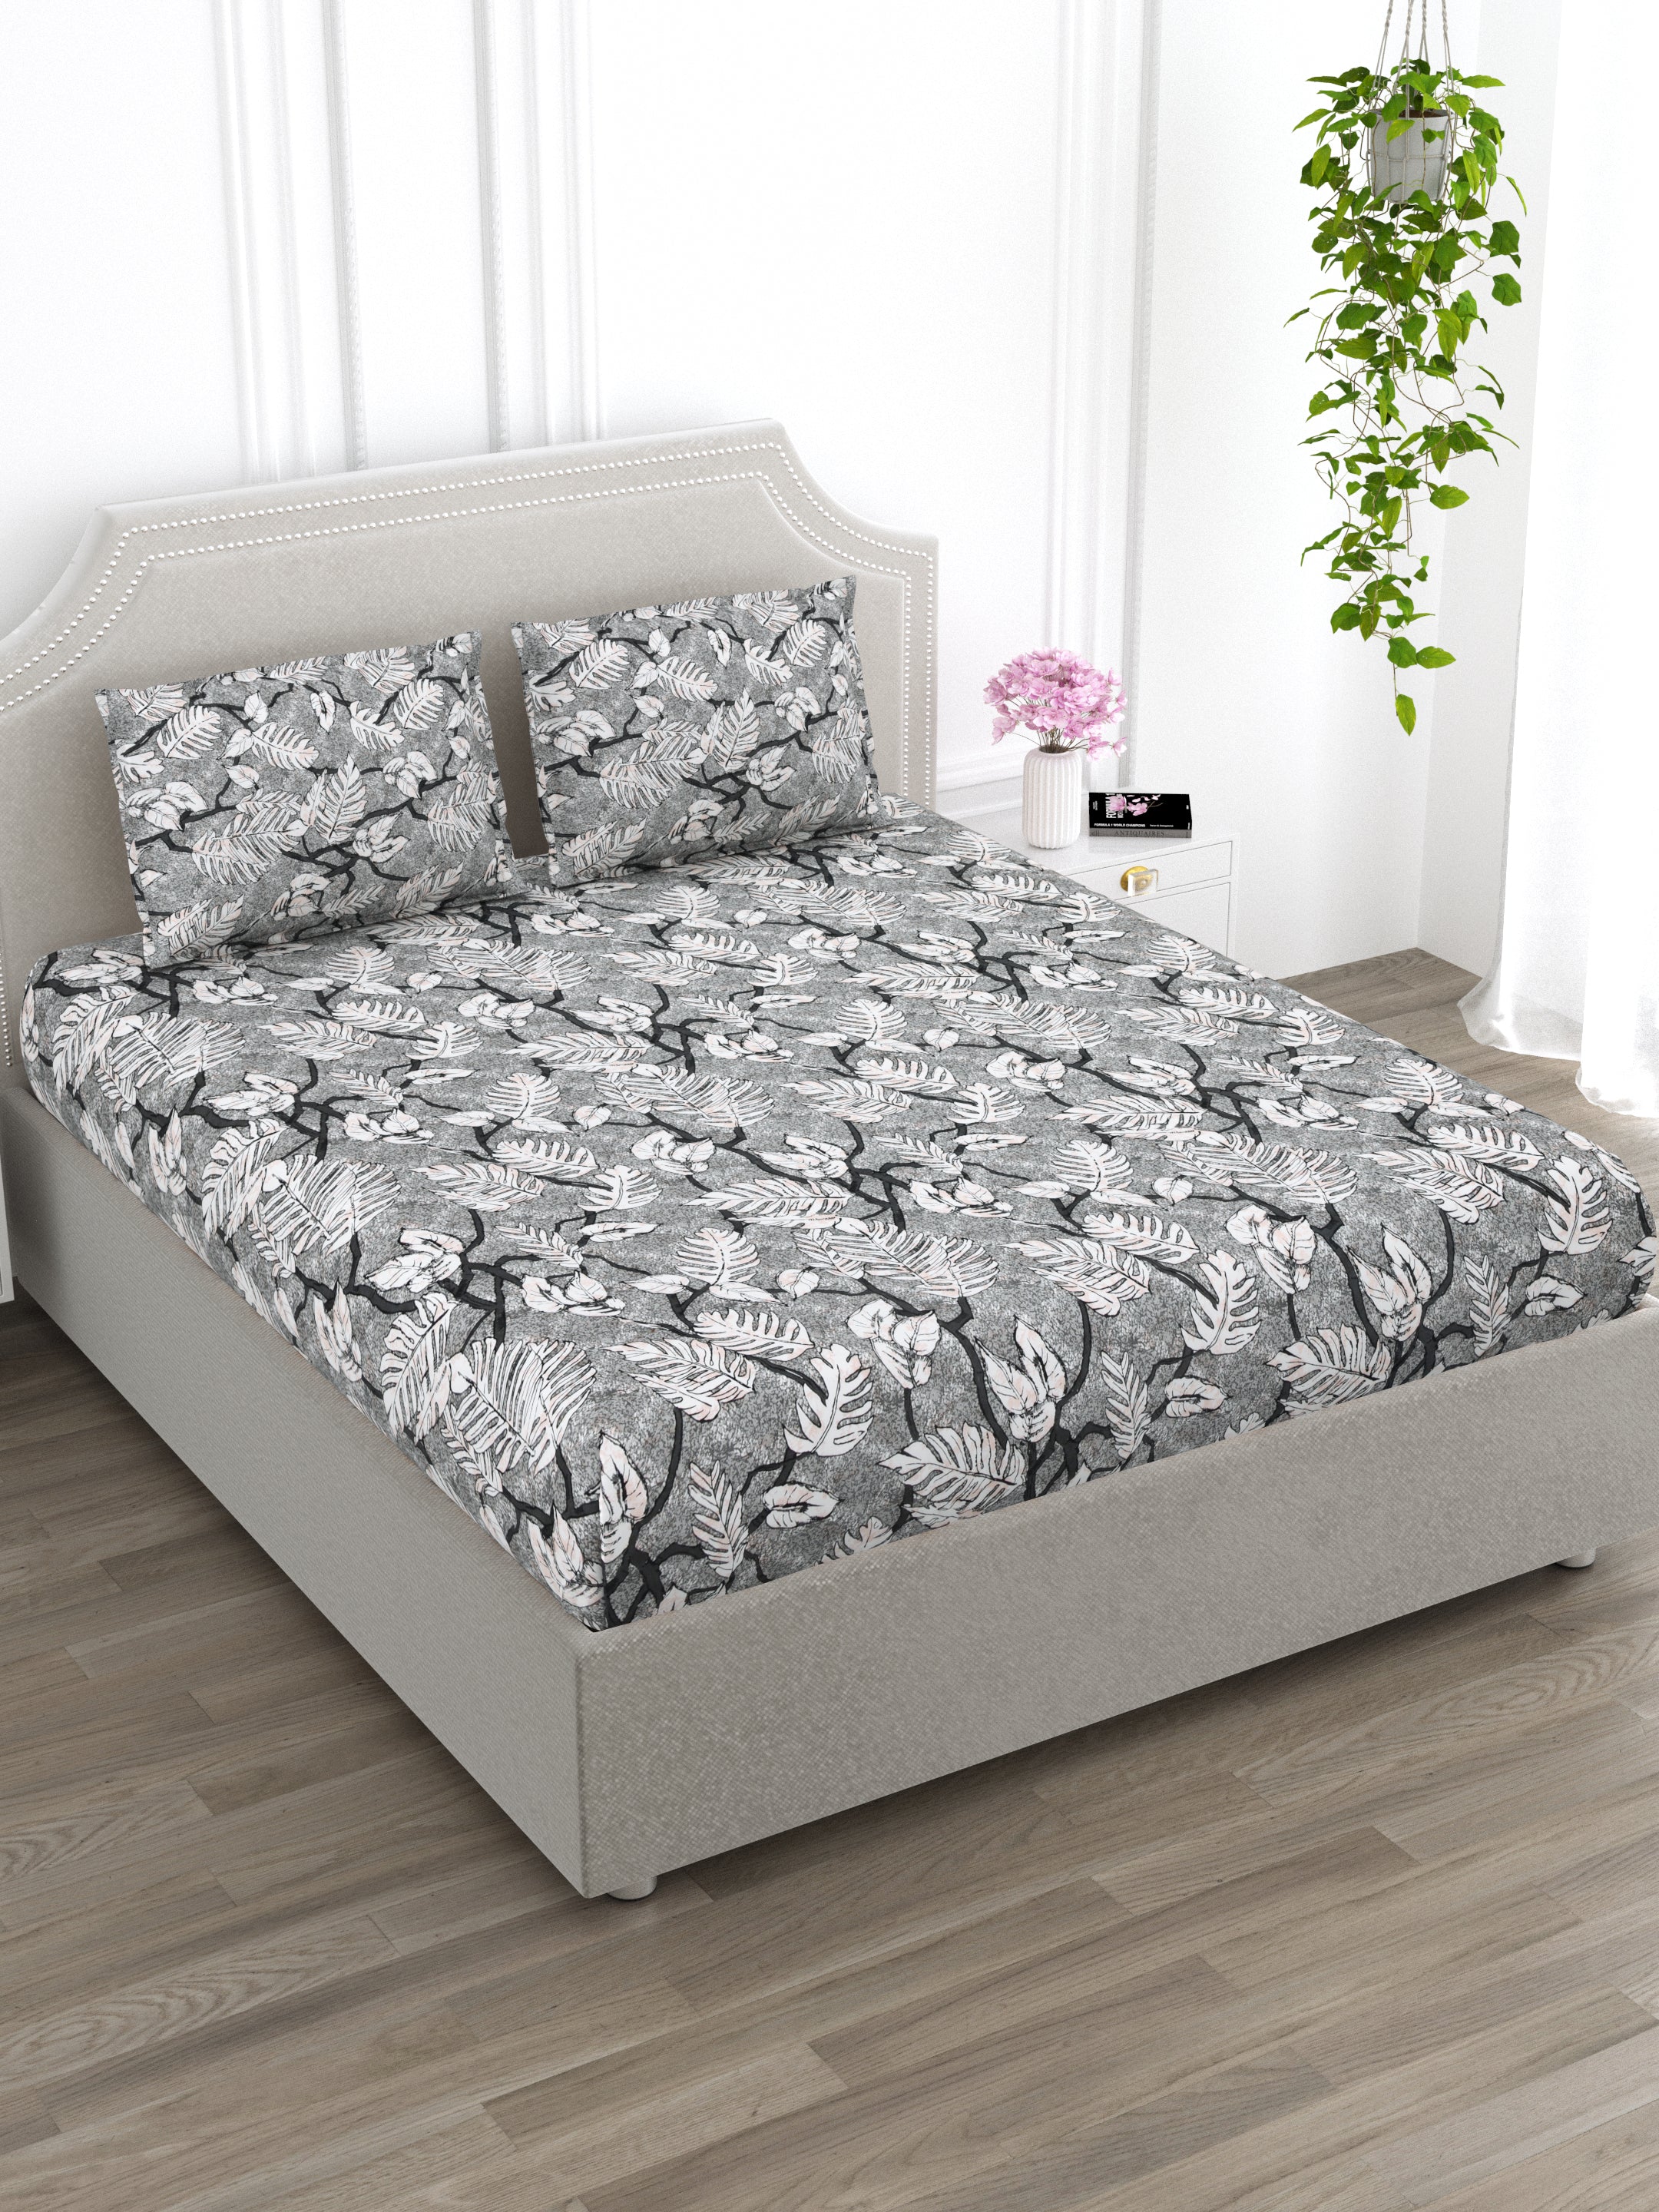 Grey and White Floral Super King Size Cotton Bedsheet